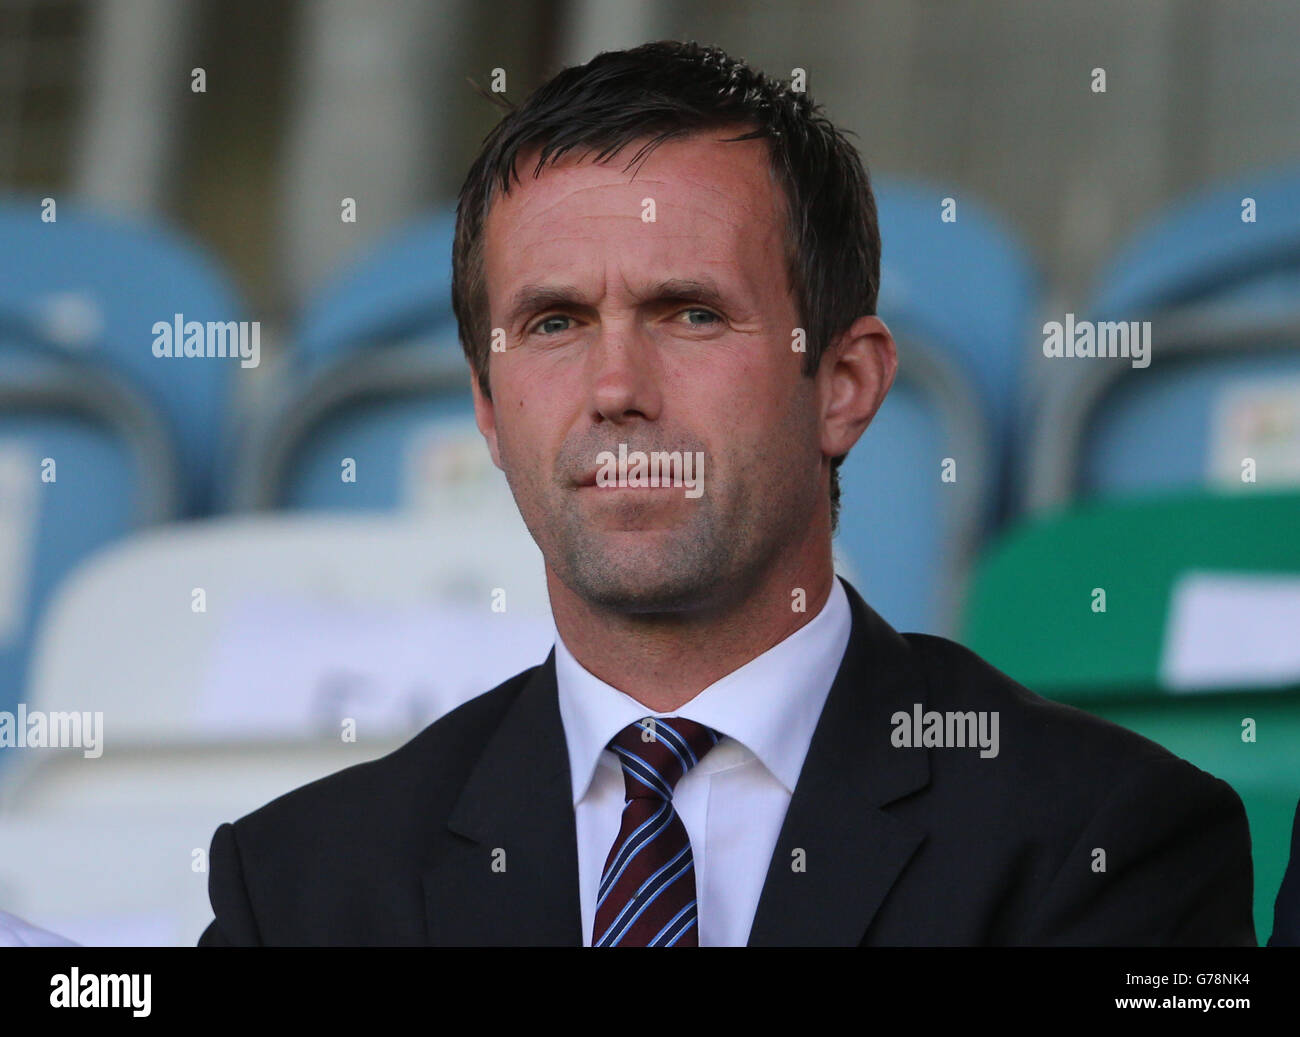 Celtic Manager Ronny Deila In The Stands During The Uefa Champions League Second Qualifying